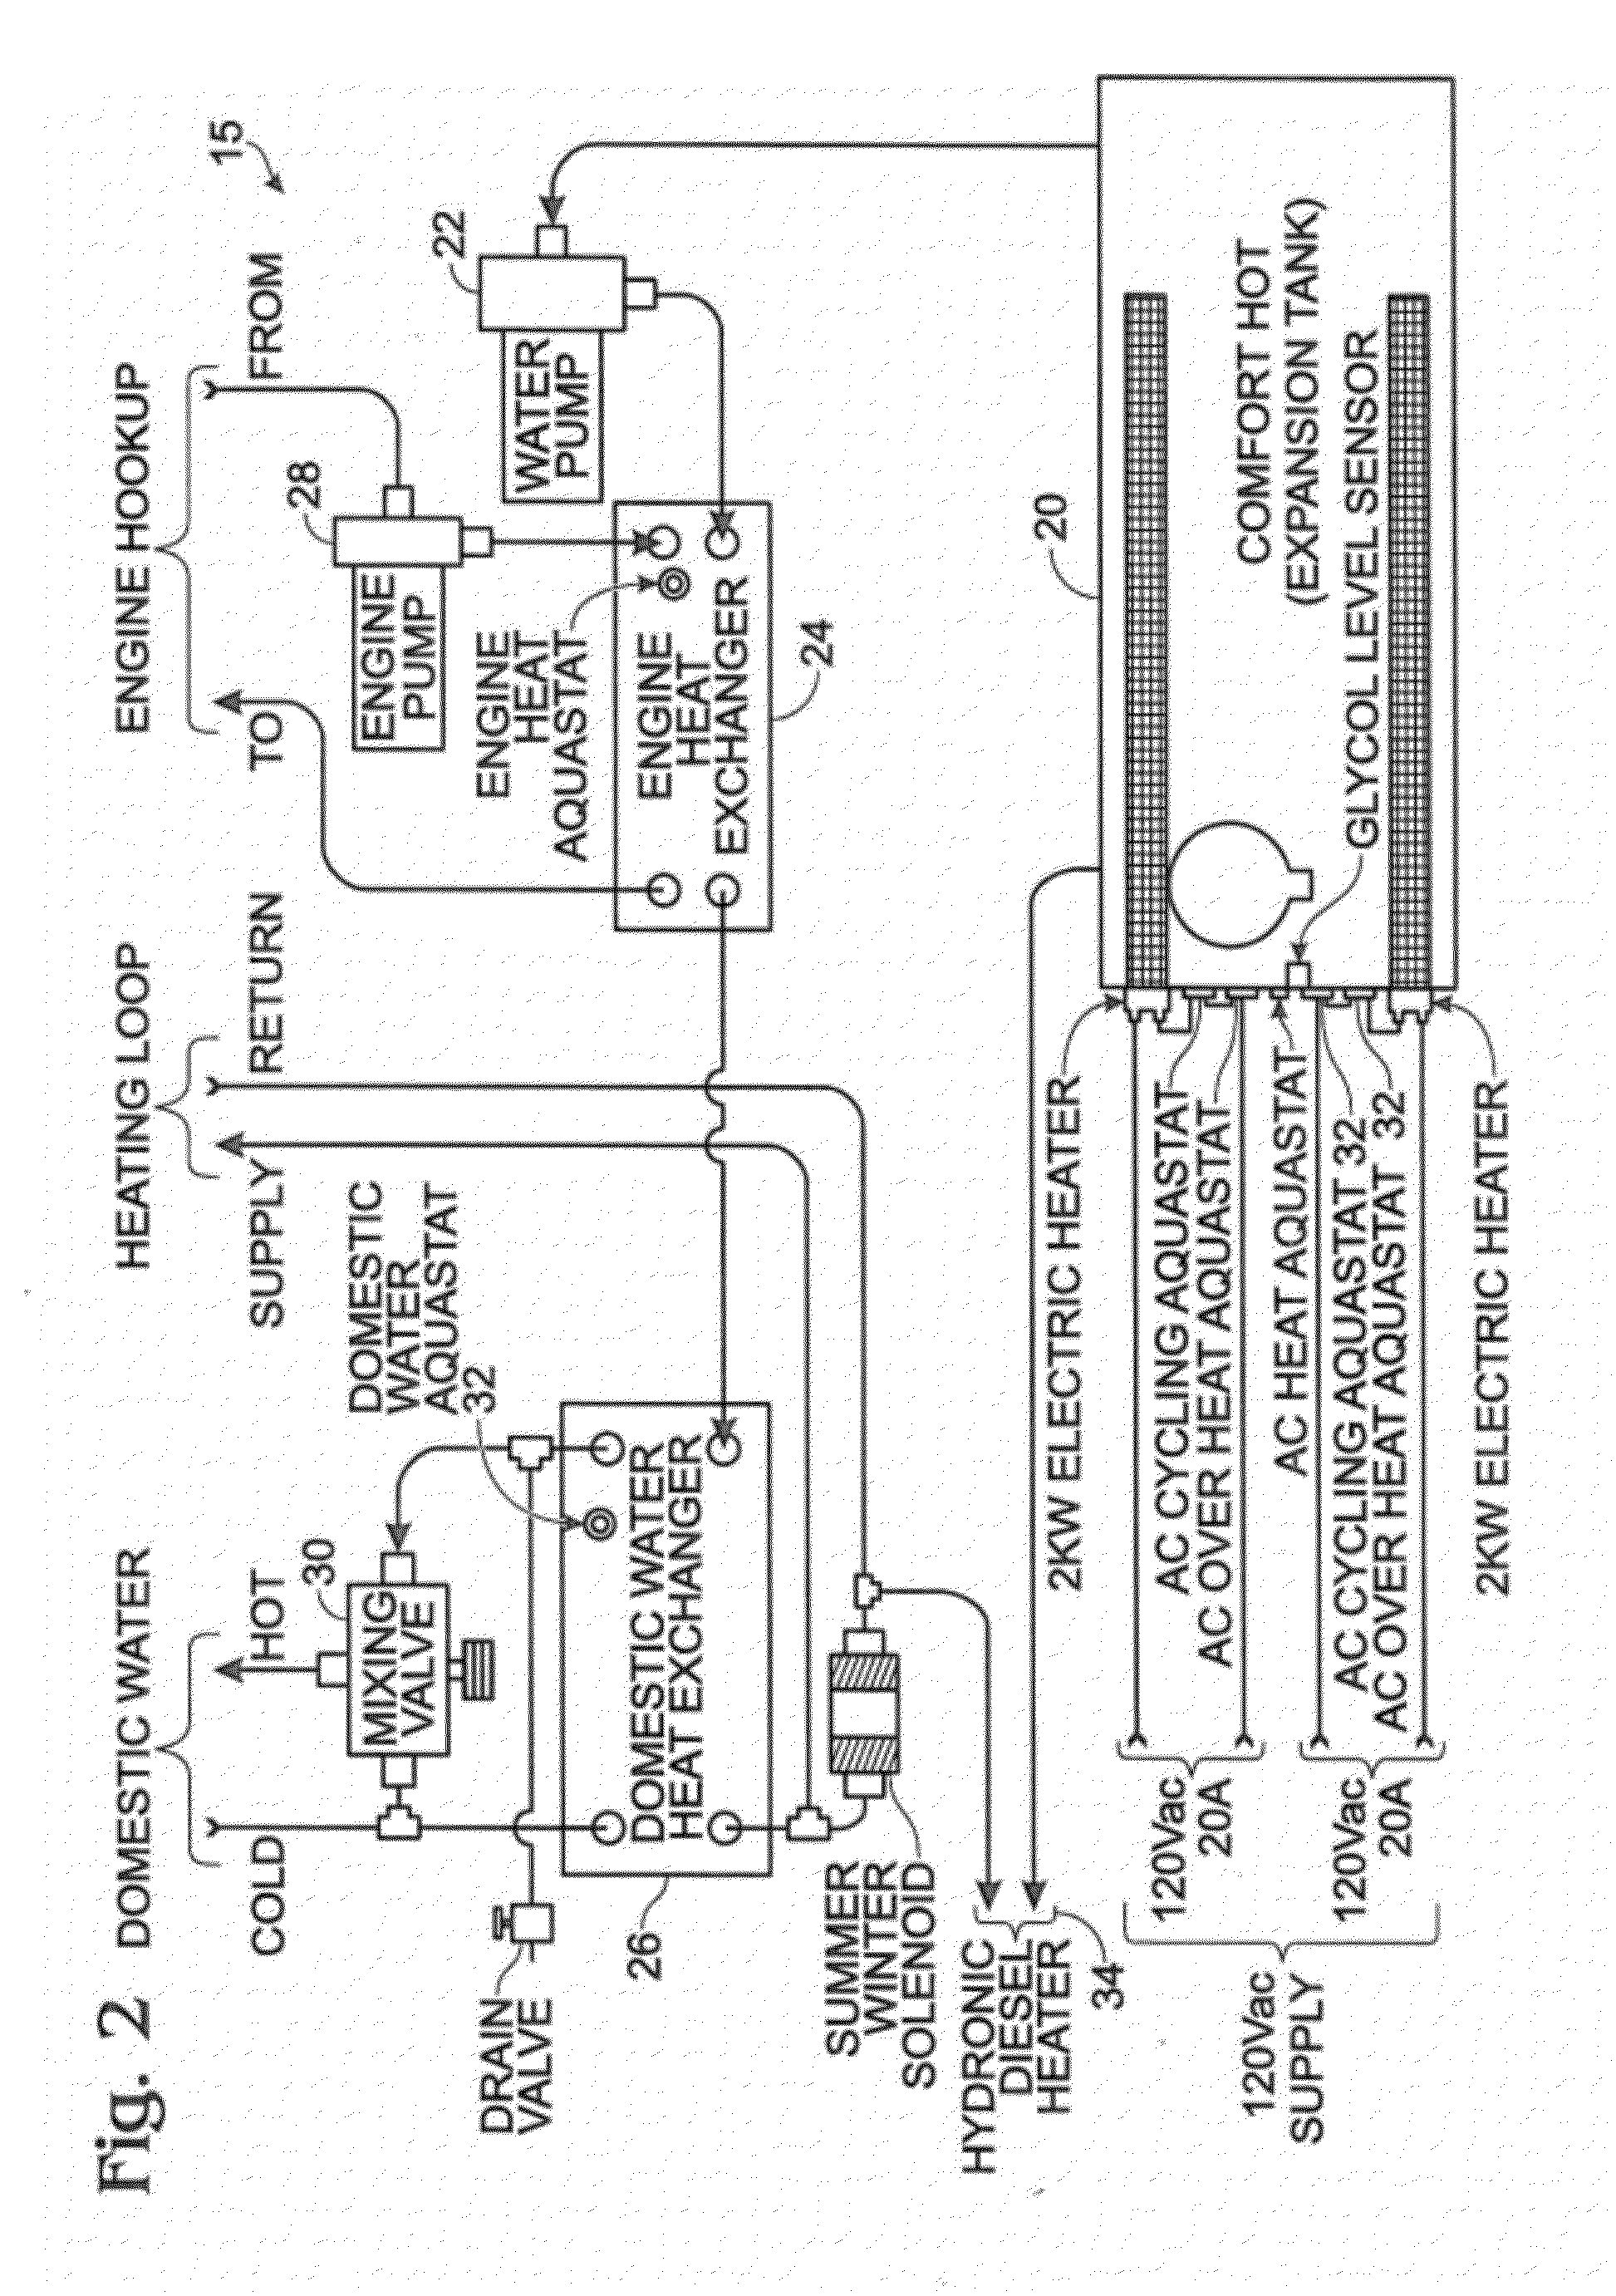 Controller for recreational-vehicle heating system